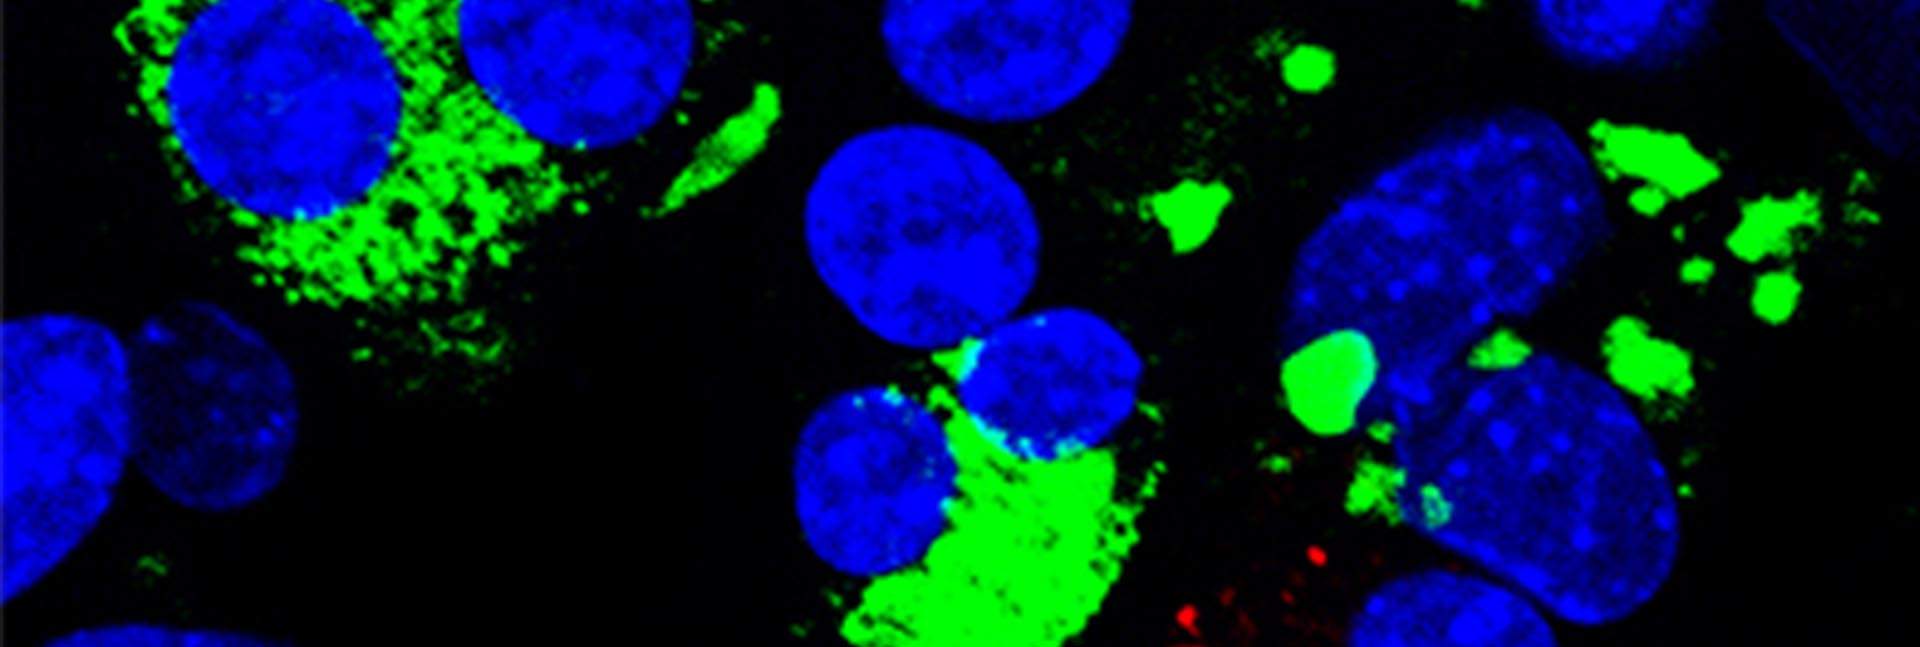 Reprogrammed cells: β cells expressing insulin (green) and the closely related δ cells expressing somatostatin (red). Blue staining shows cell nuclei. Many reprogrammed cells contain two nuclei (a unique feature of some exocrine cells) demonstrating their exocrine cell origin